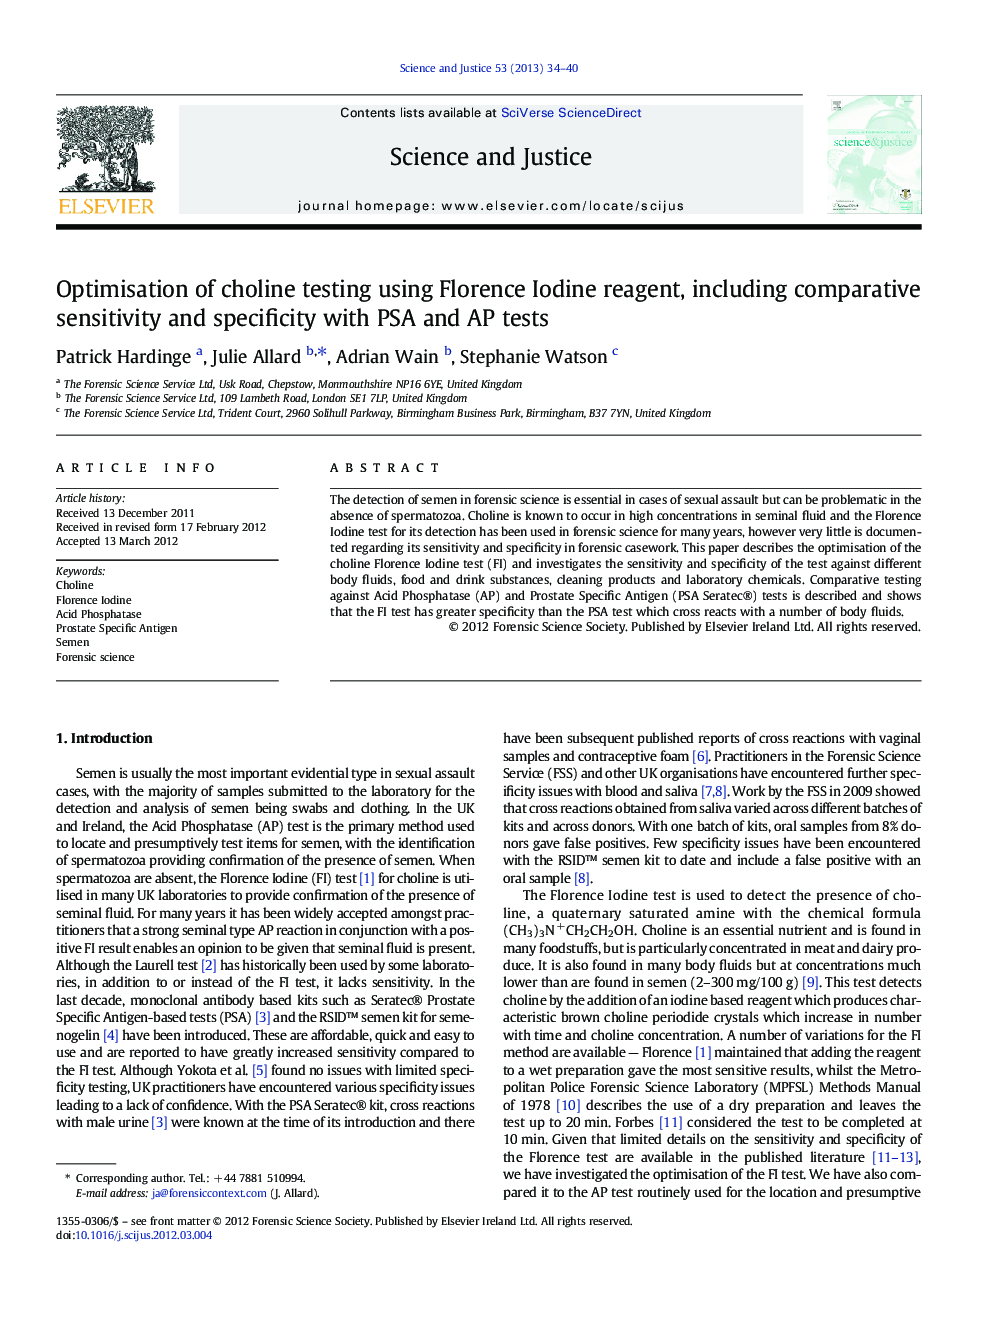 Optimisation of choline testing using Florence Iodine reagent, including comparative sensitivity and specificity with PSA and AP tests